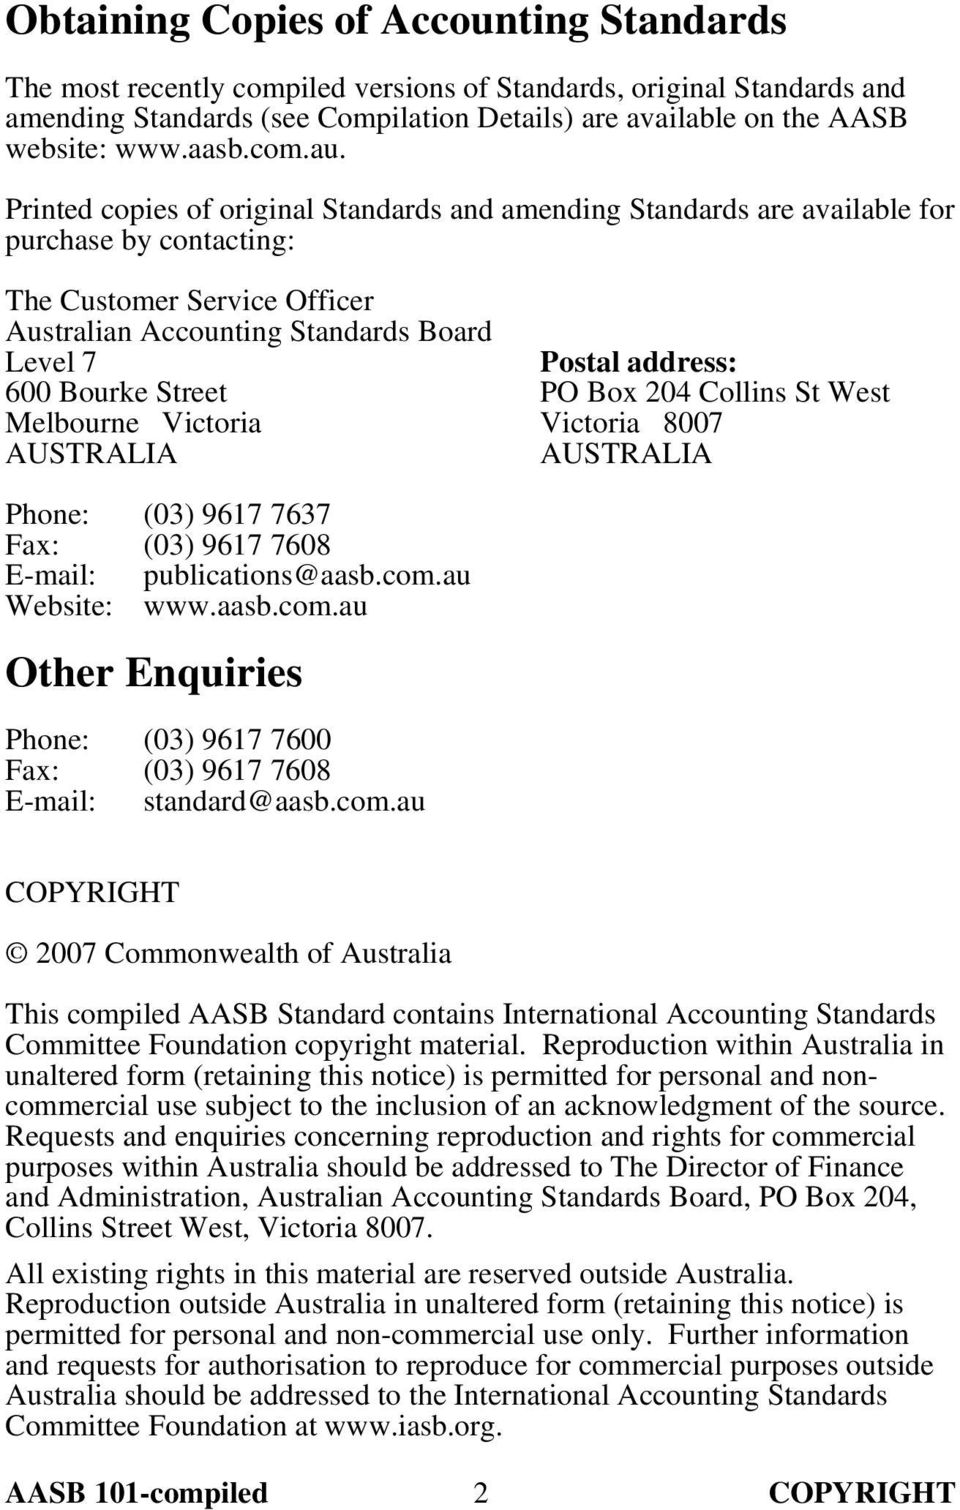 Printed copies of original Standards and amending Standards are available for purchase by contacting: The Customer Service Officer Australian Accounting Standards Board Level 7 600 Bourke Street